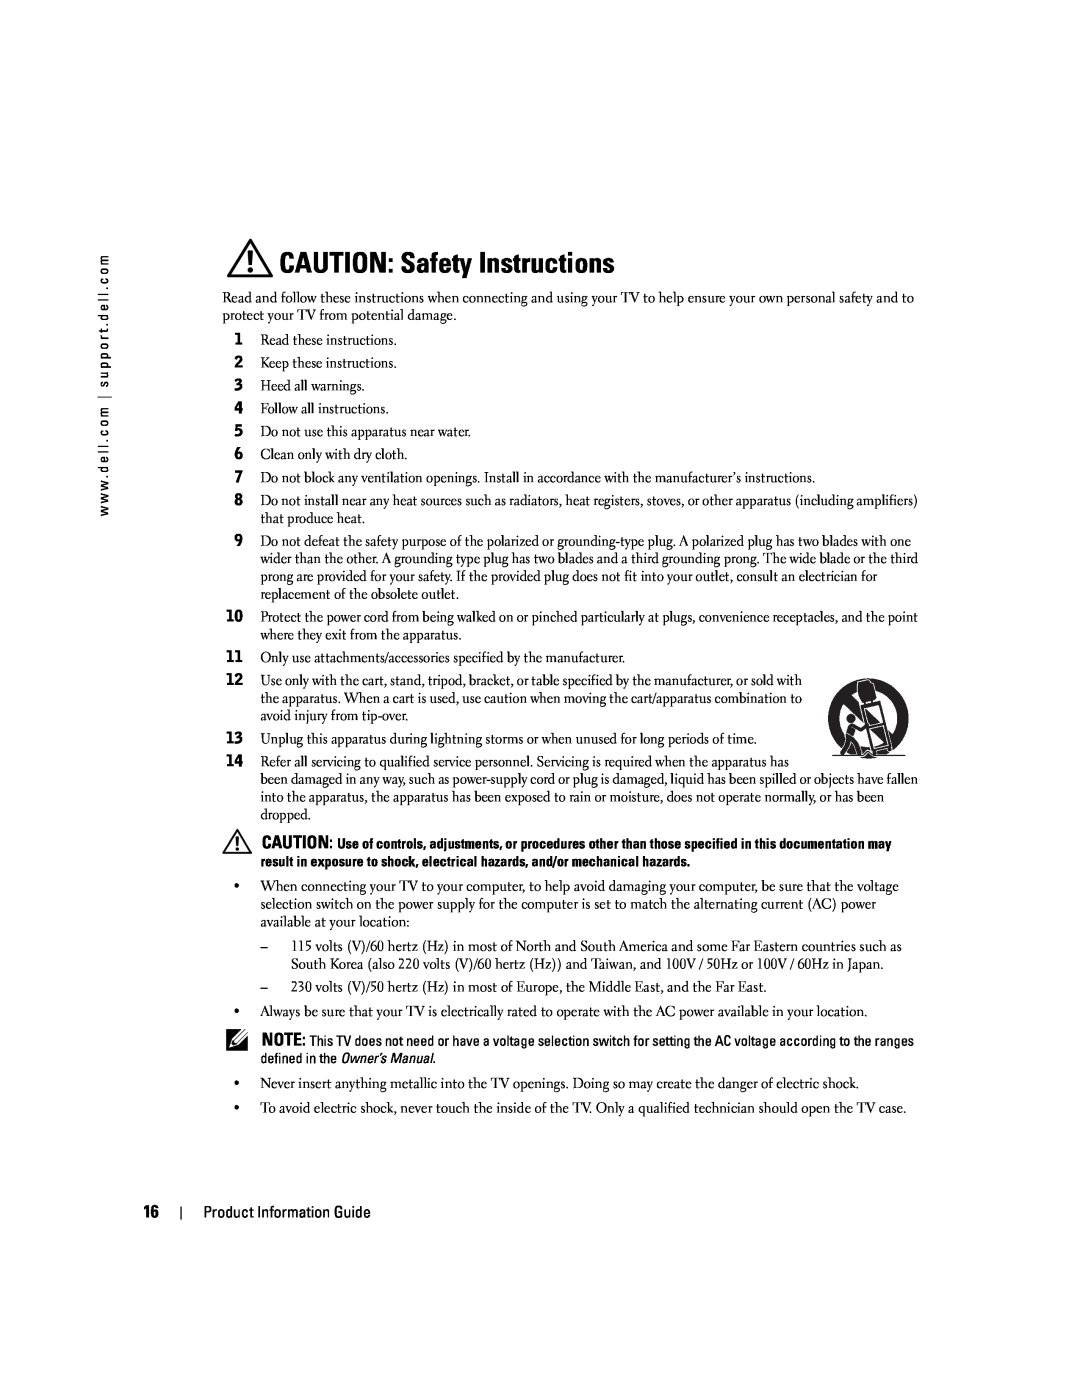 Dell W4200 manual CAUTION Safety Instructions 